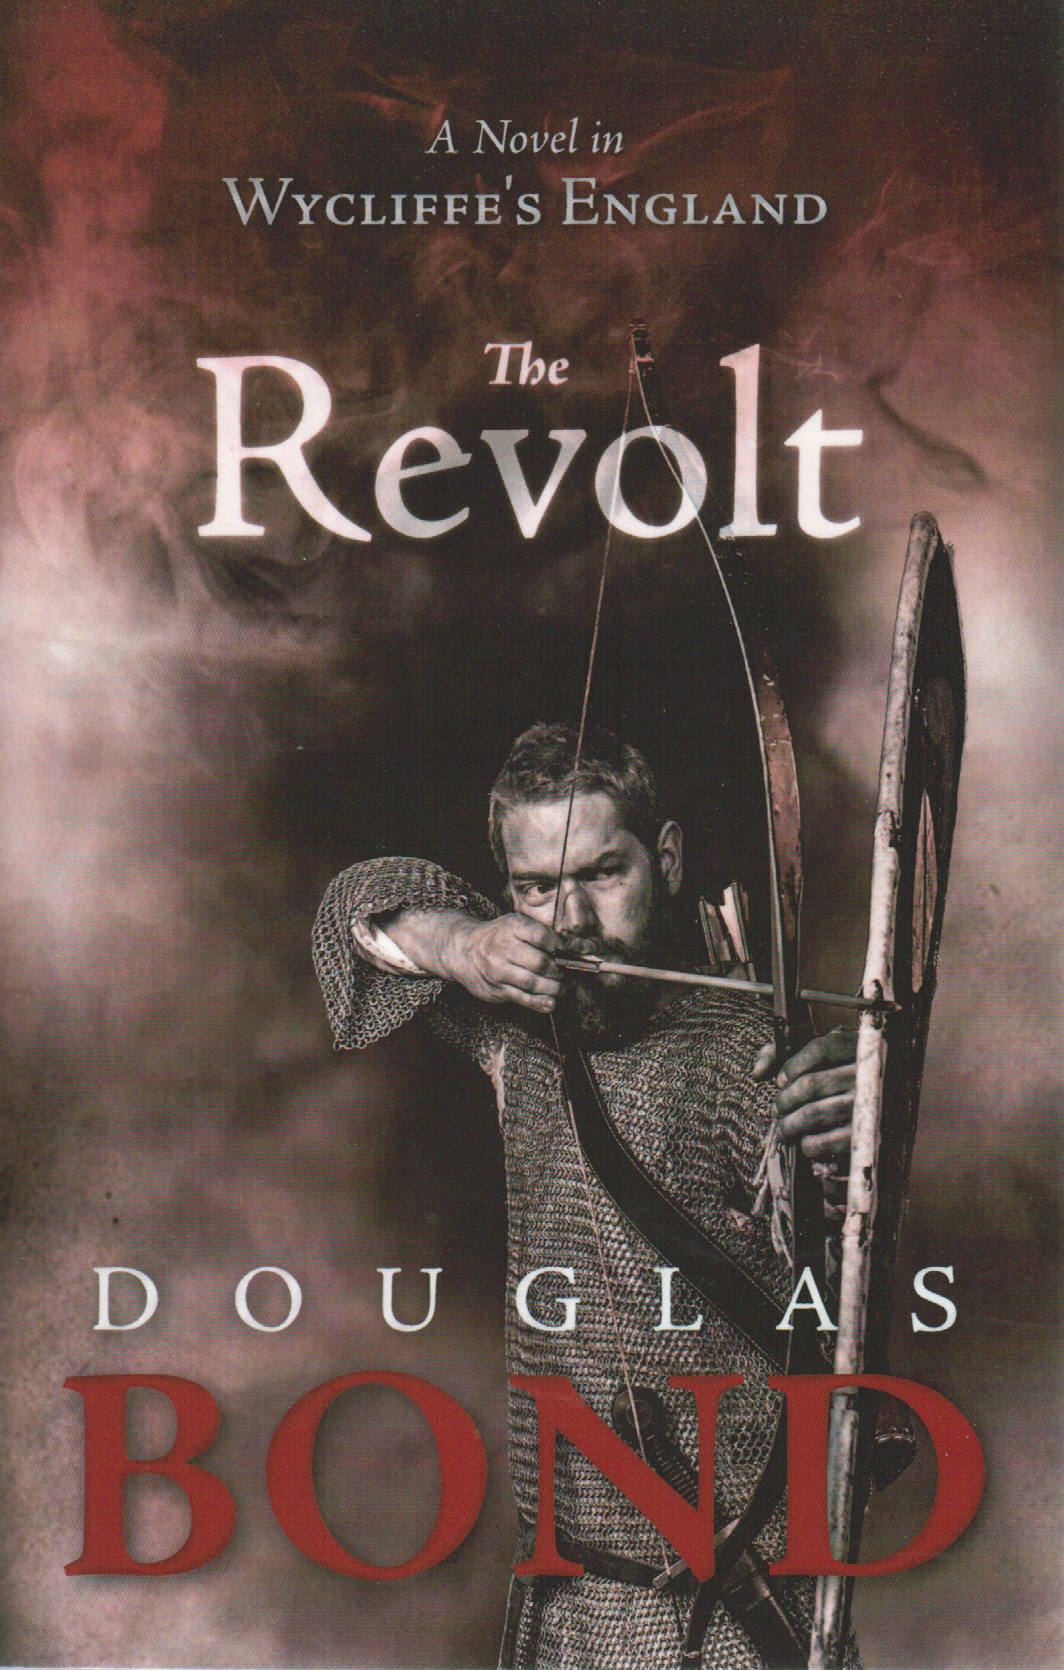 The Revolt: A Novel in Wycliffe's England